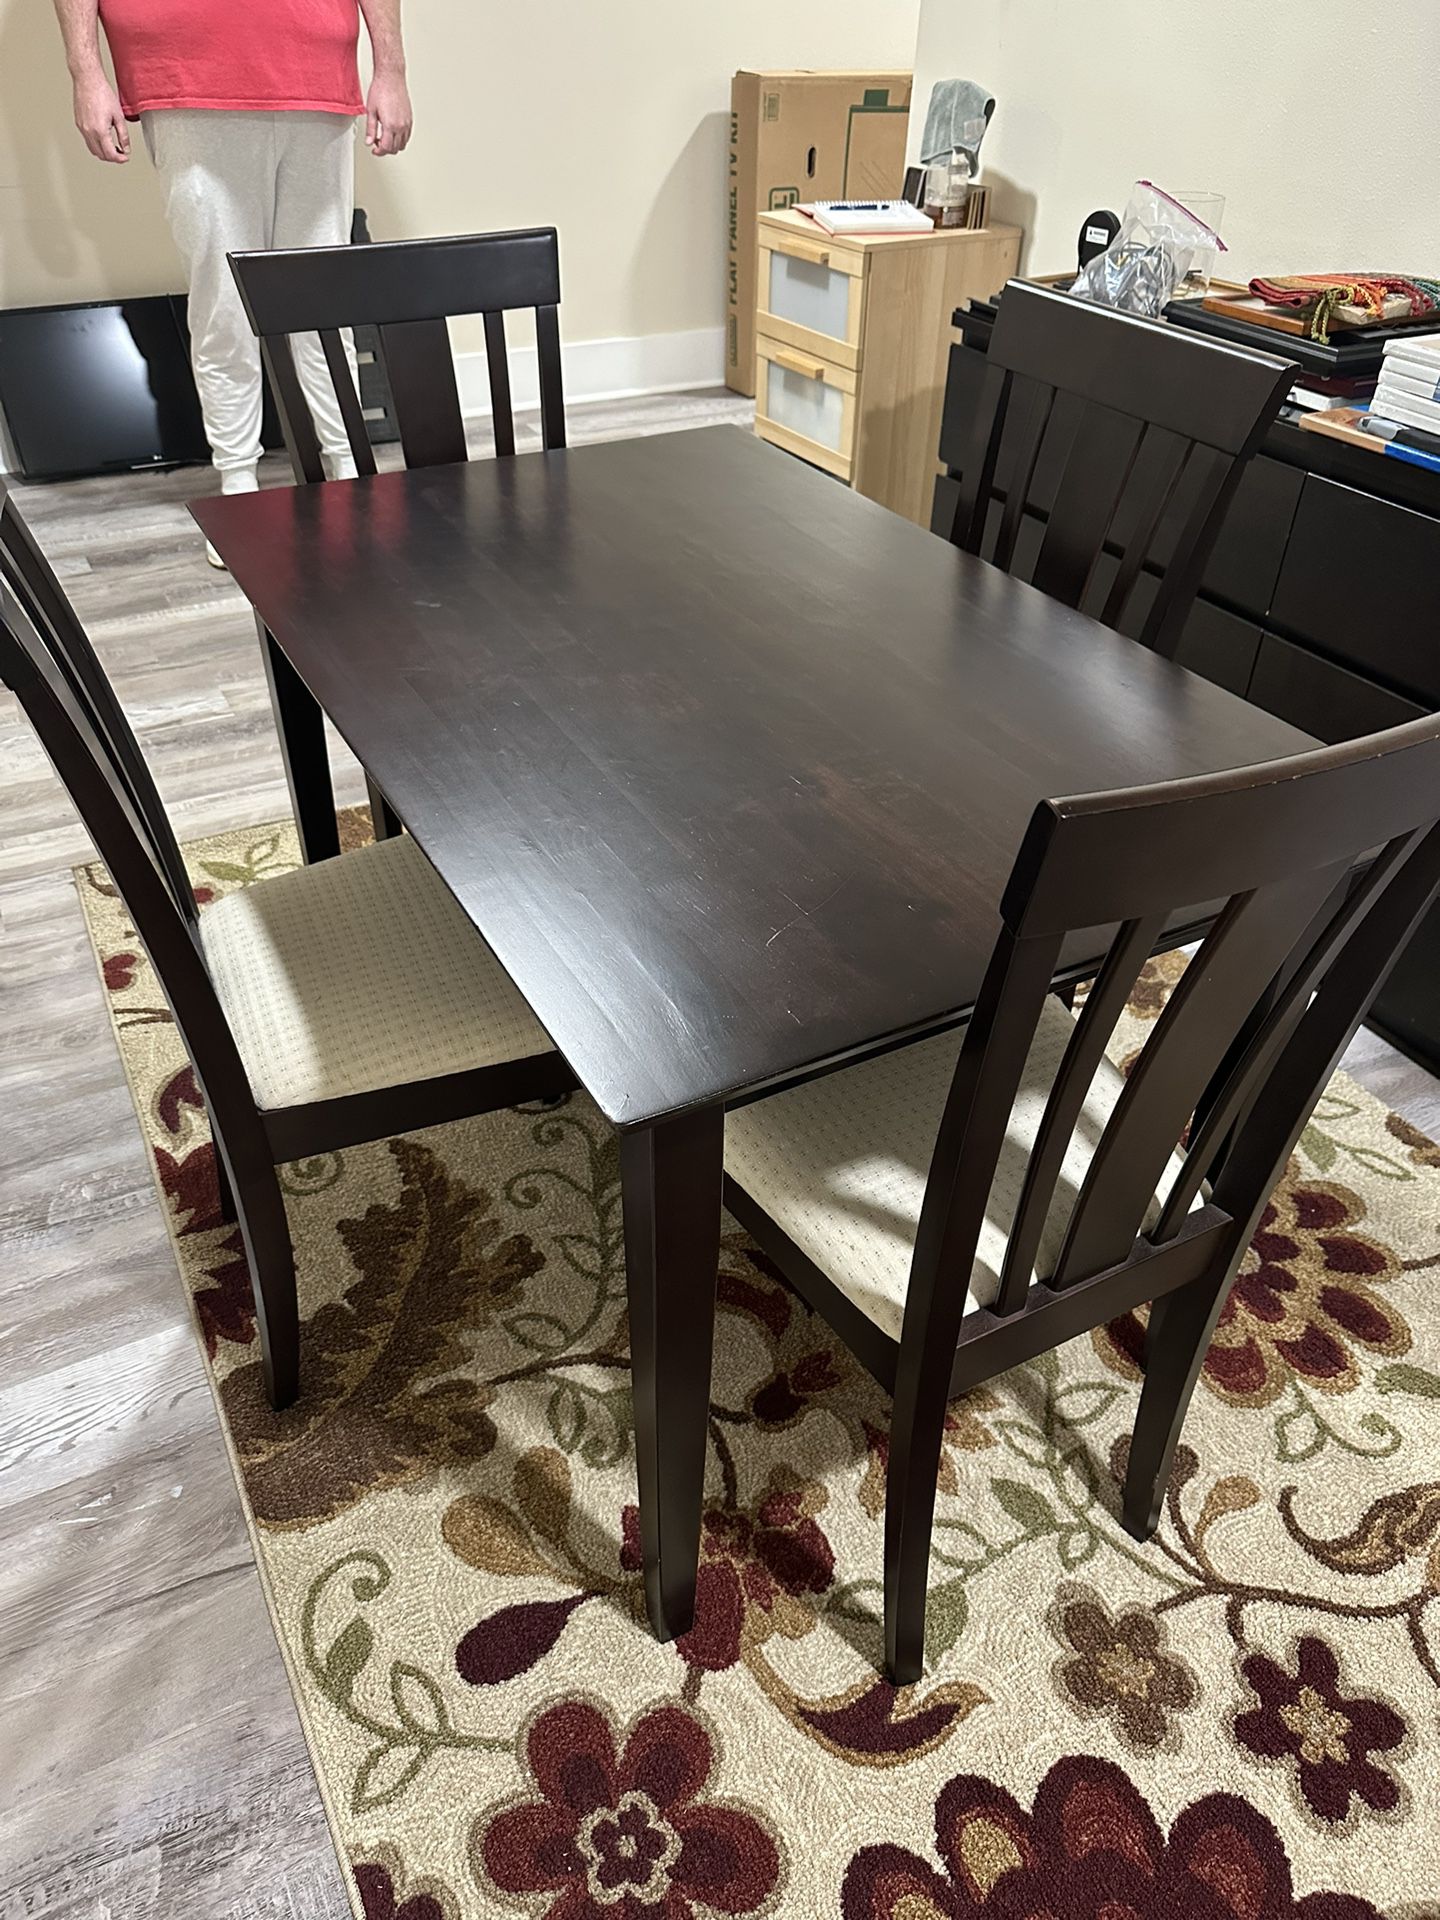 Dining Table Set with 4 Chair